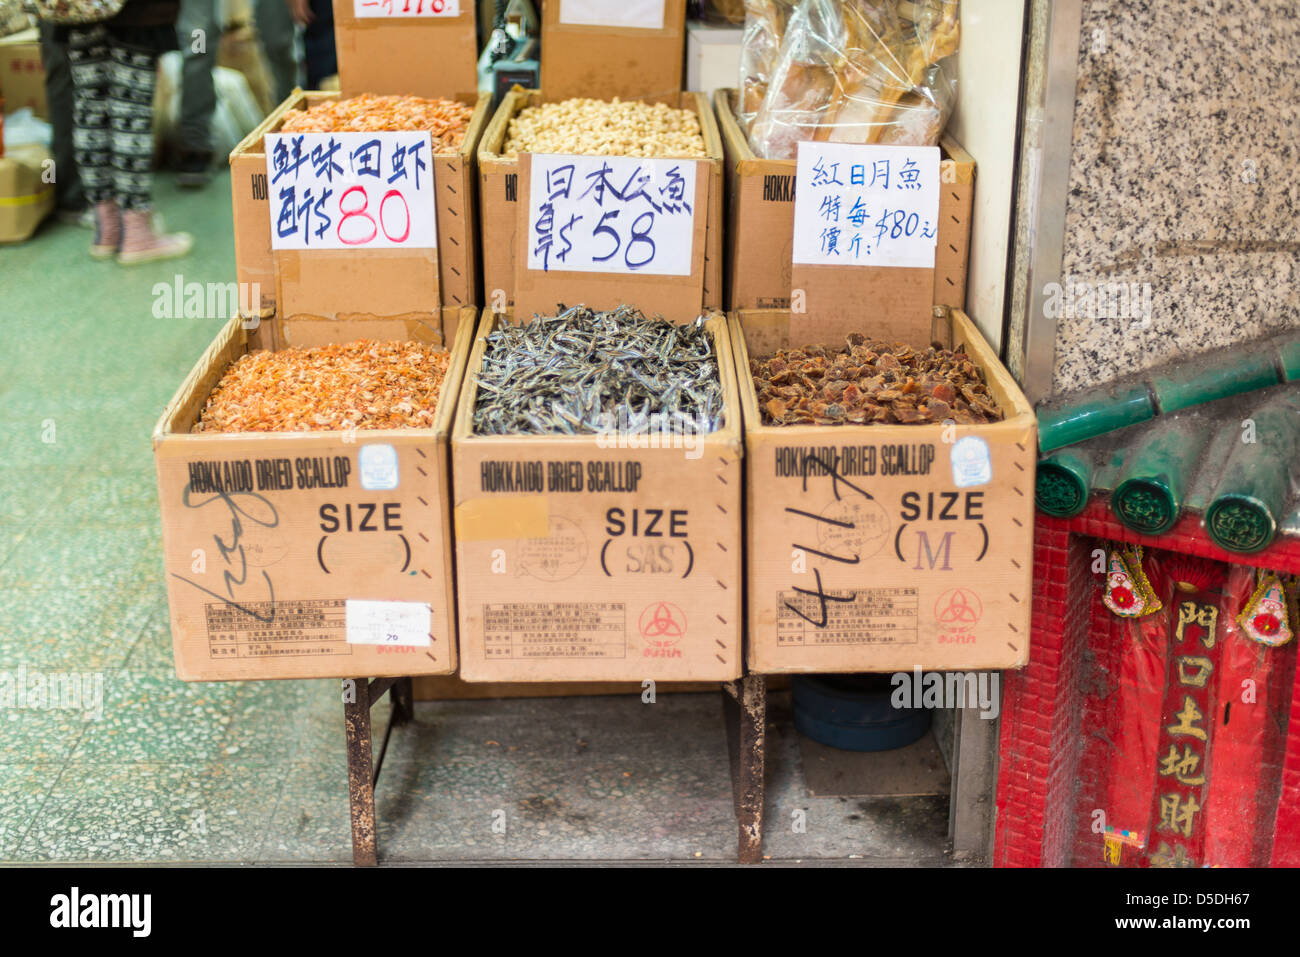 Dried food stalled in the entrance of a store in Hong Kong Stock Photo